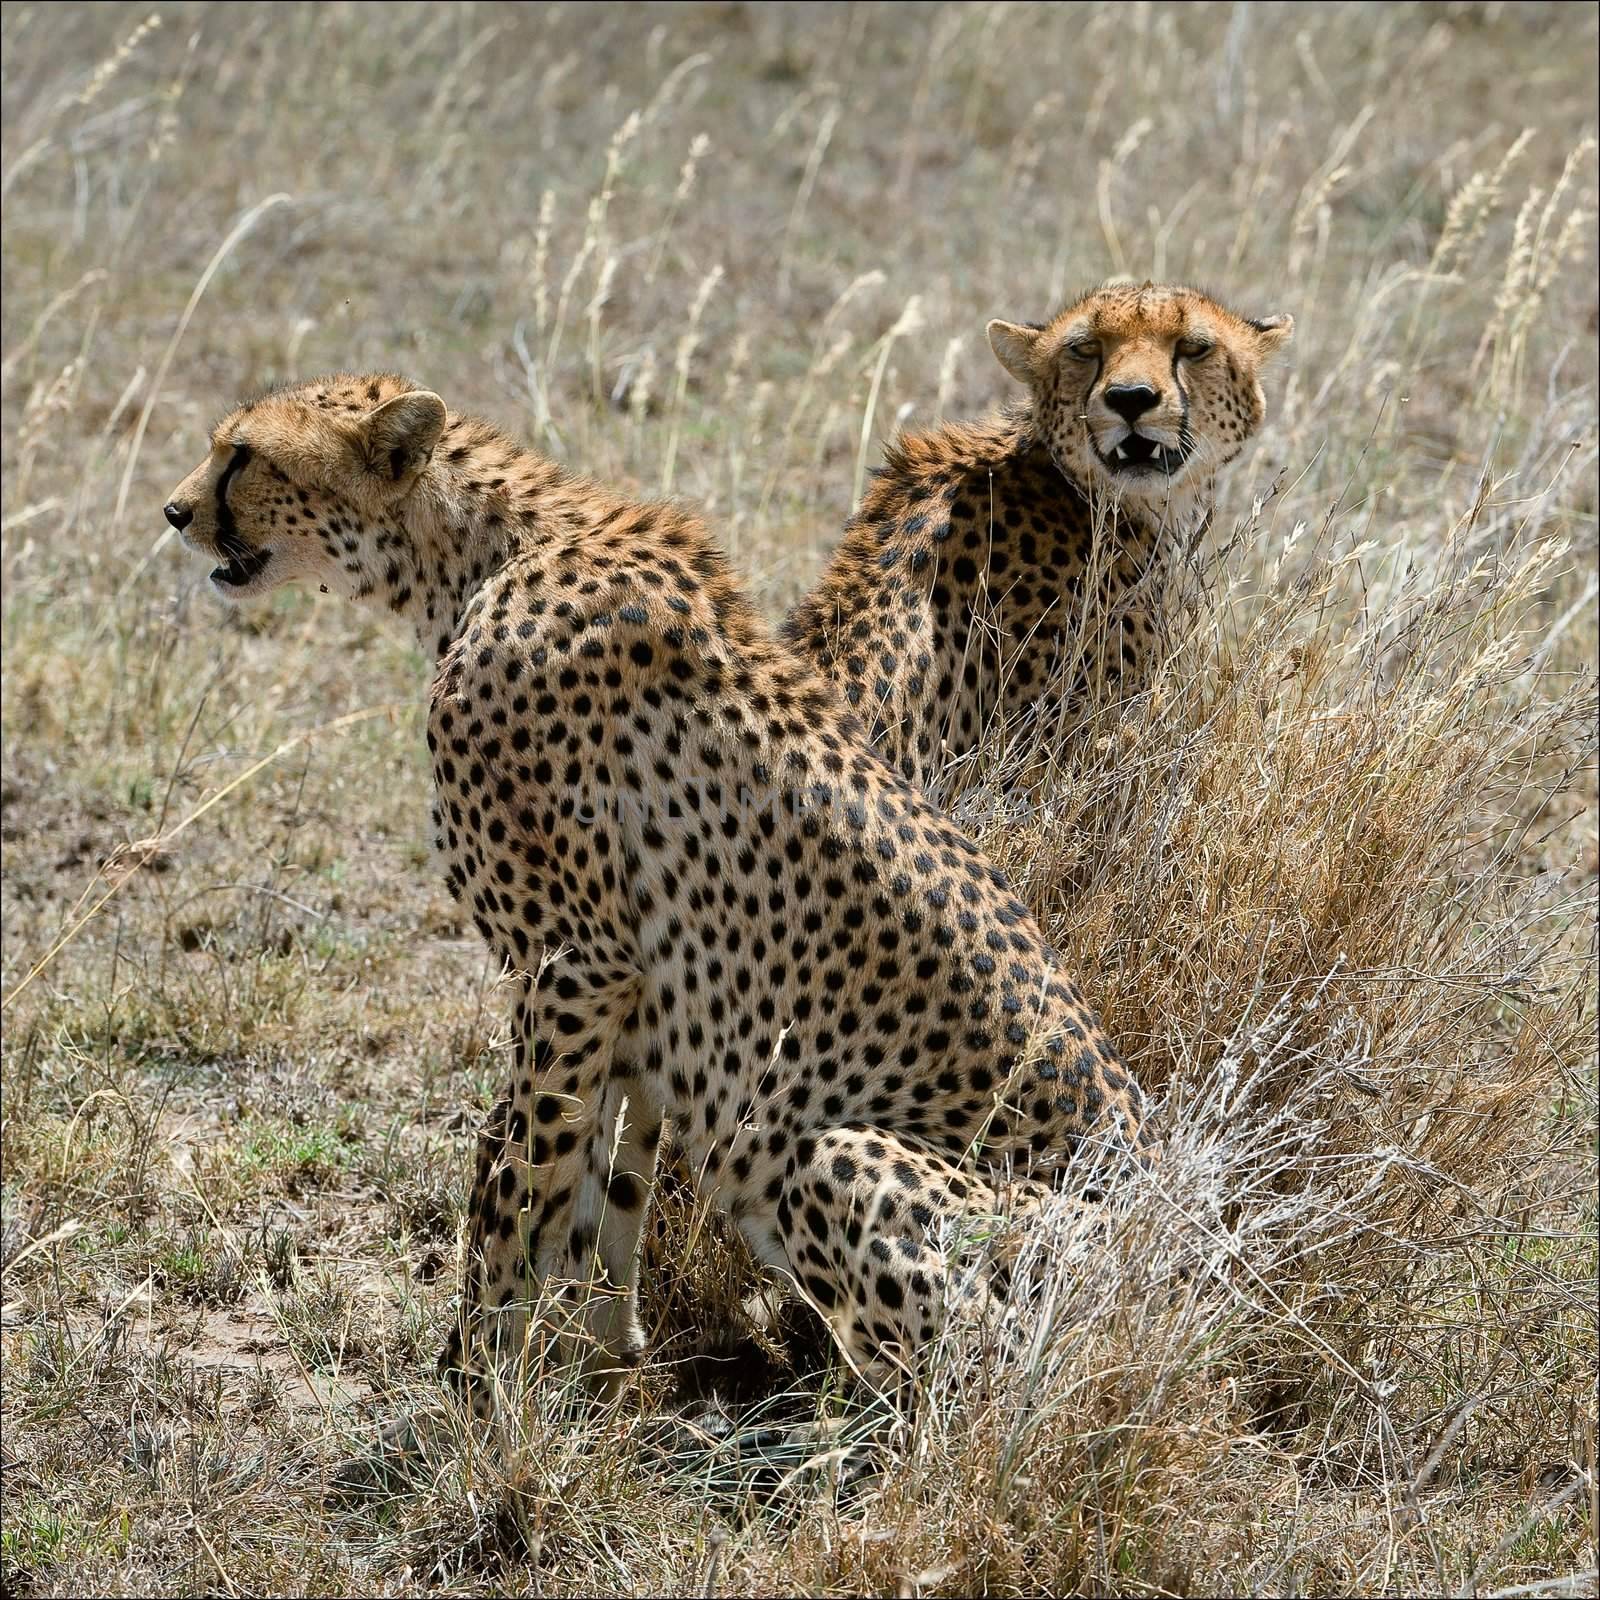 Two cheetahs in a grass.  by SURZ